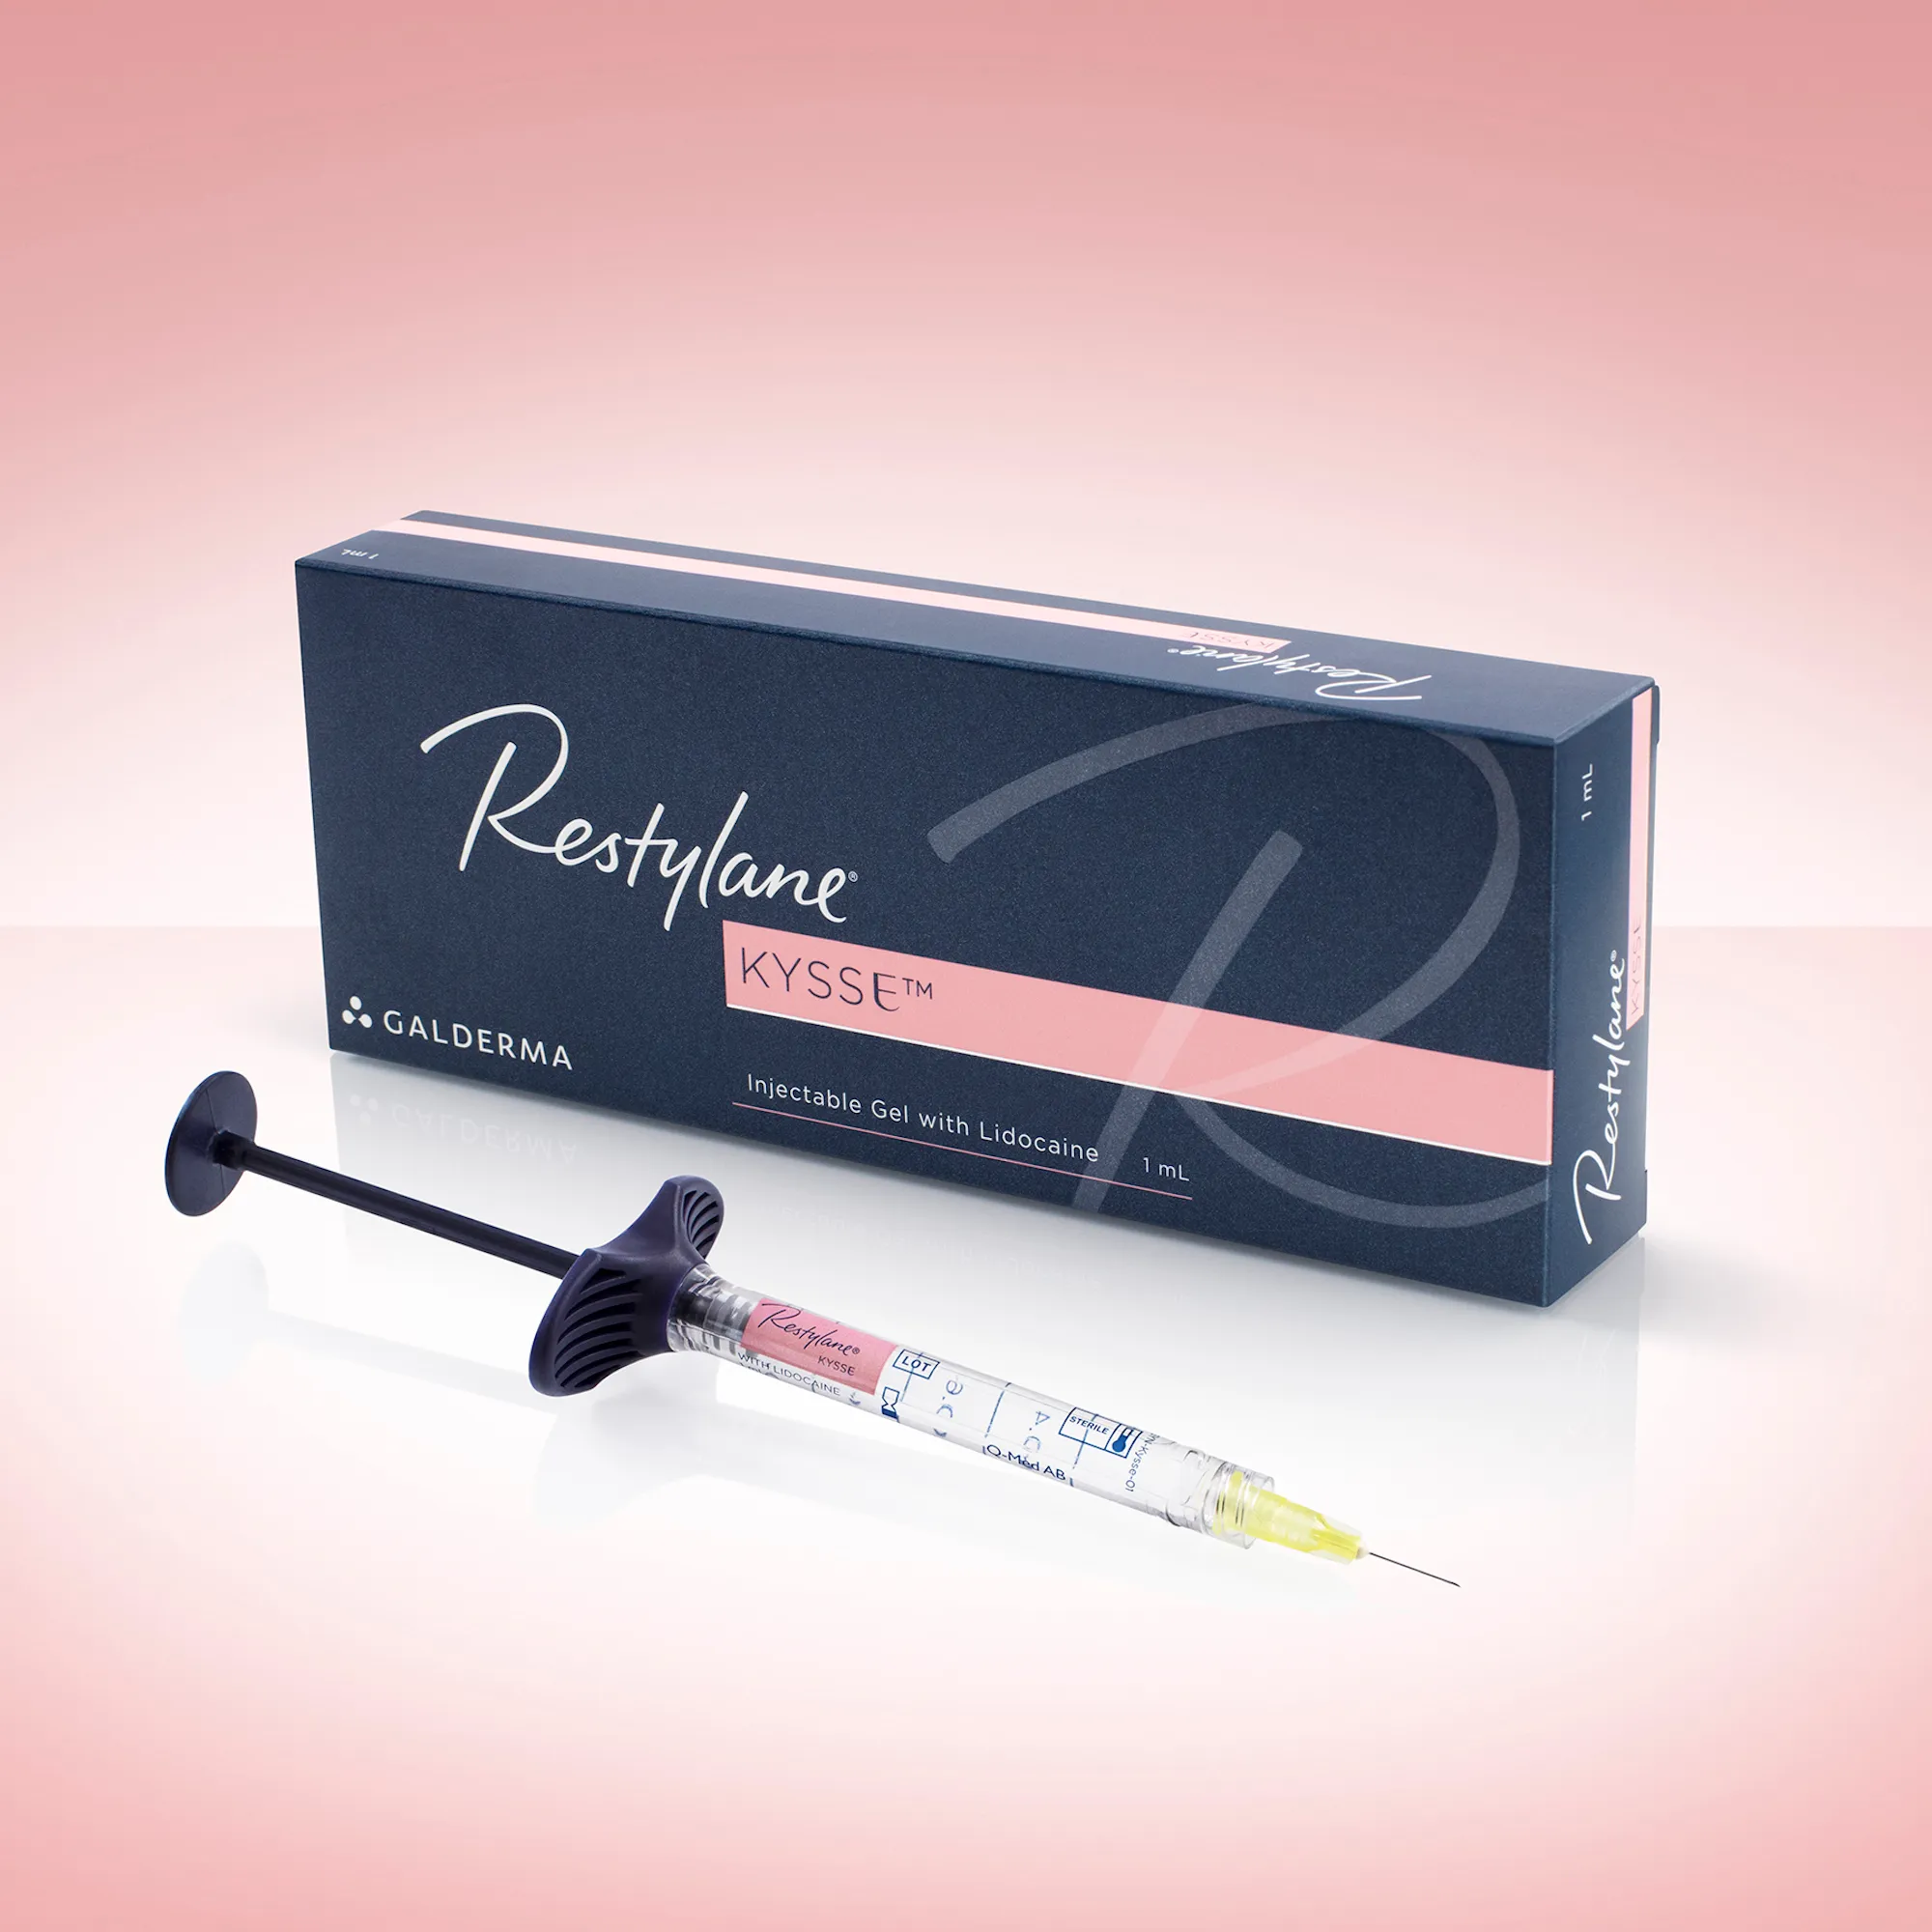 Restylane Kysse, a dermal filler product for lips, displayed on a pink background with a whitish glow surrounding the Restylane Kysse packaging and a syringe in front of it. The product box is dark blue and features the word "Restylane" on the left side, and a pink box on the lower right with the word "Kysse" in it. The image showcases the product packaging and syringe, emphasizing its use for lip enhancement. The overall design conveys a sense of elegance, quality, and femininity, in line with Galderma's brand image.